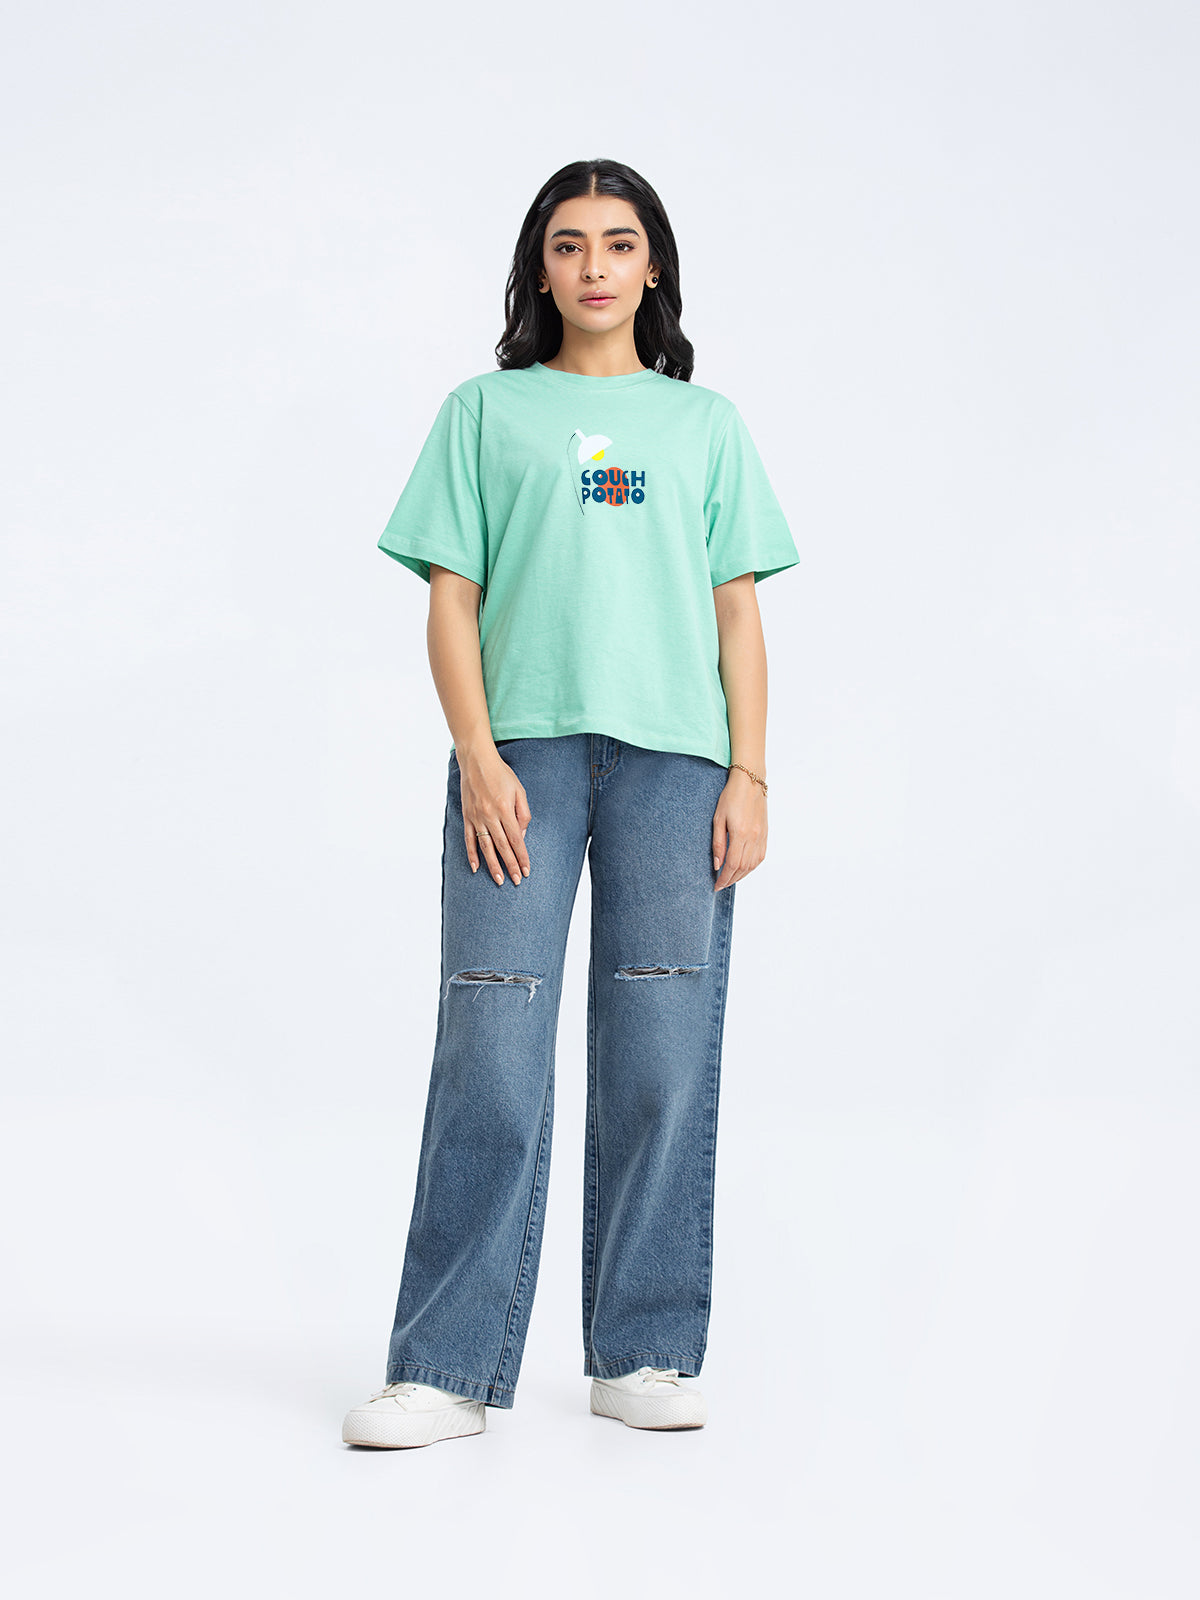 Relaxed Fit Graphic Tee - FWTGT24-047